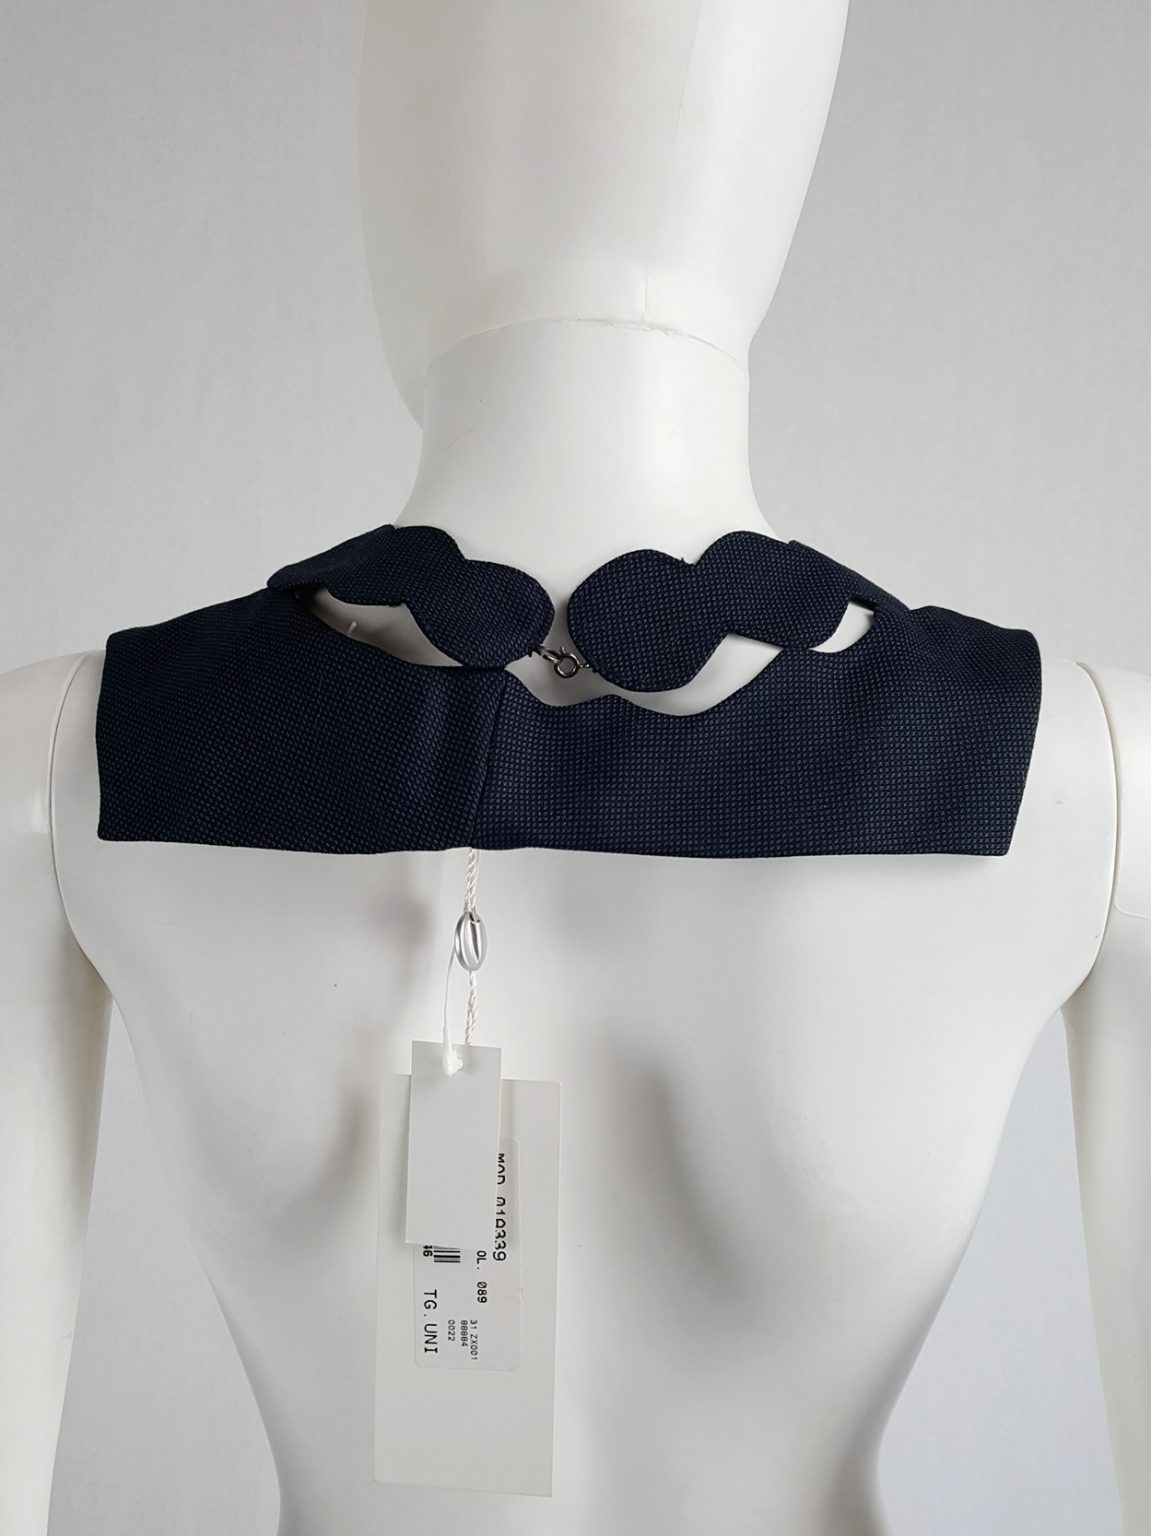 Maison Martin Margiela dark blue fabric square with cut out pearl necklace — fall 2005